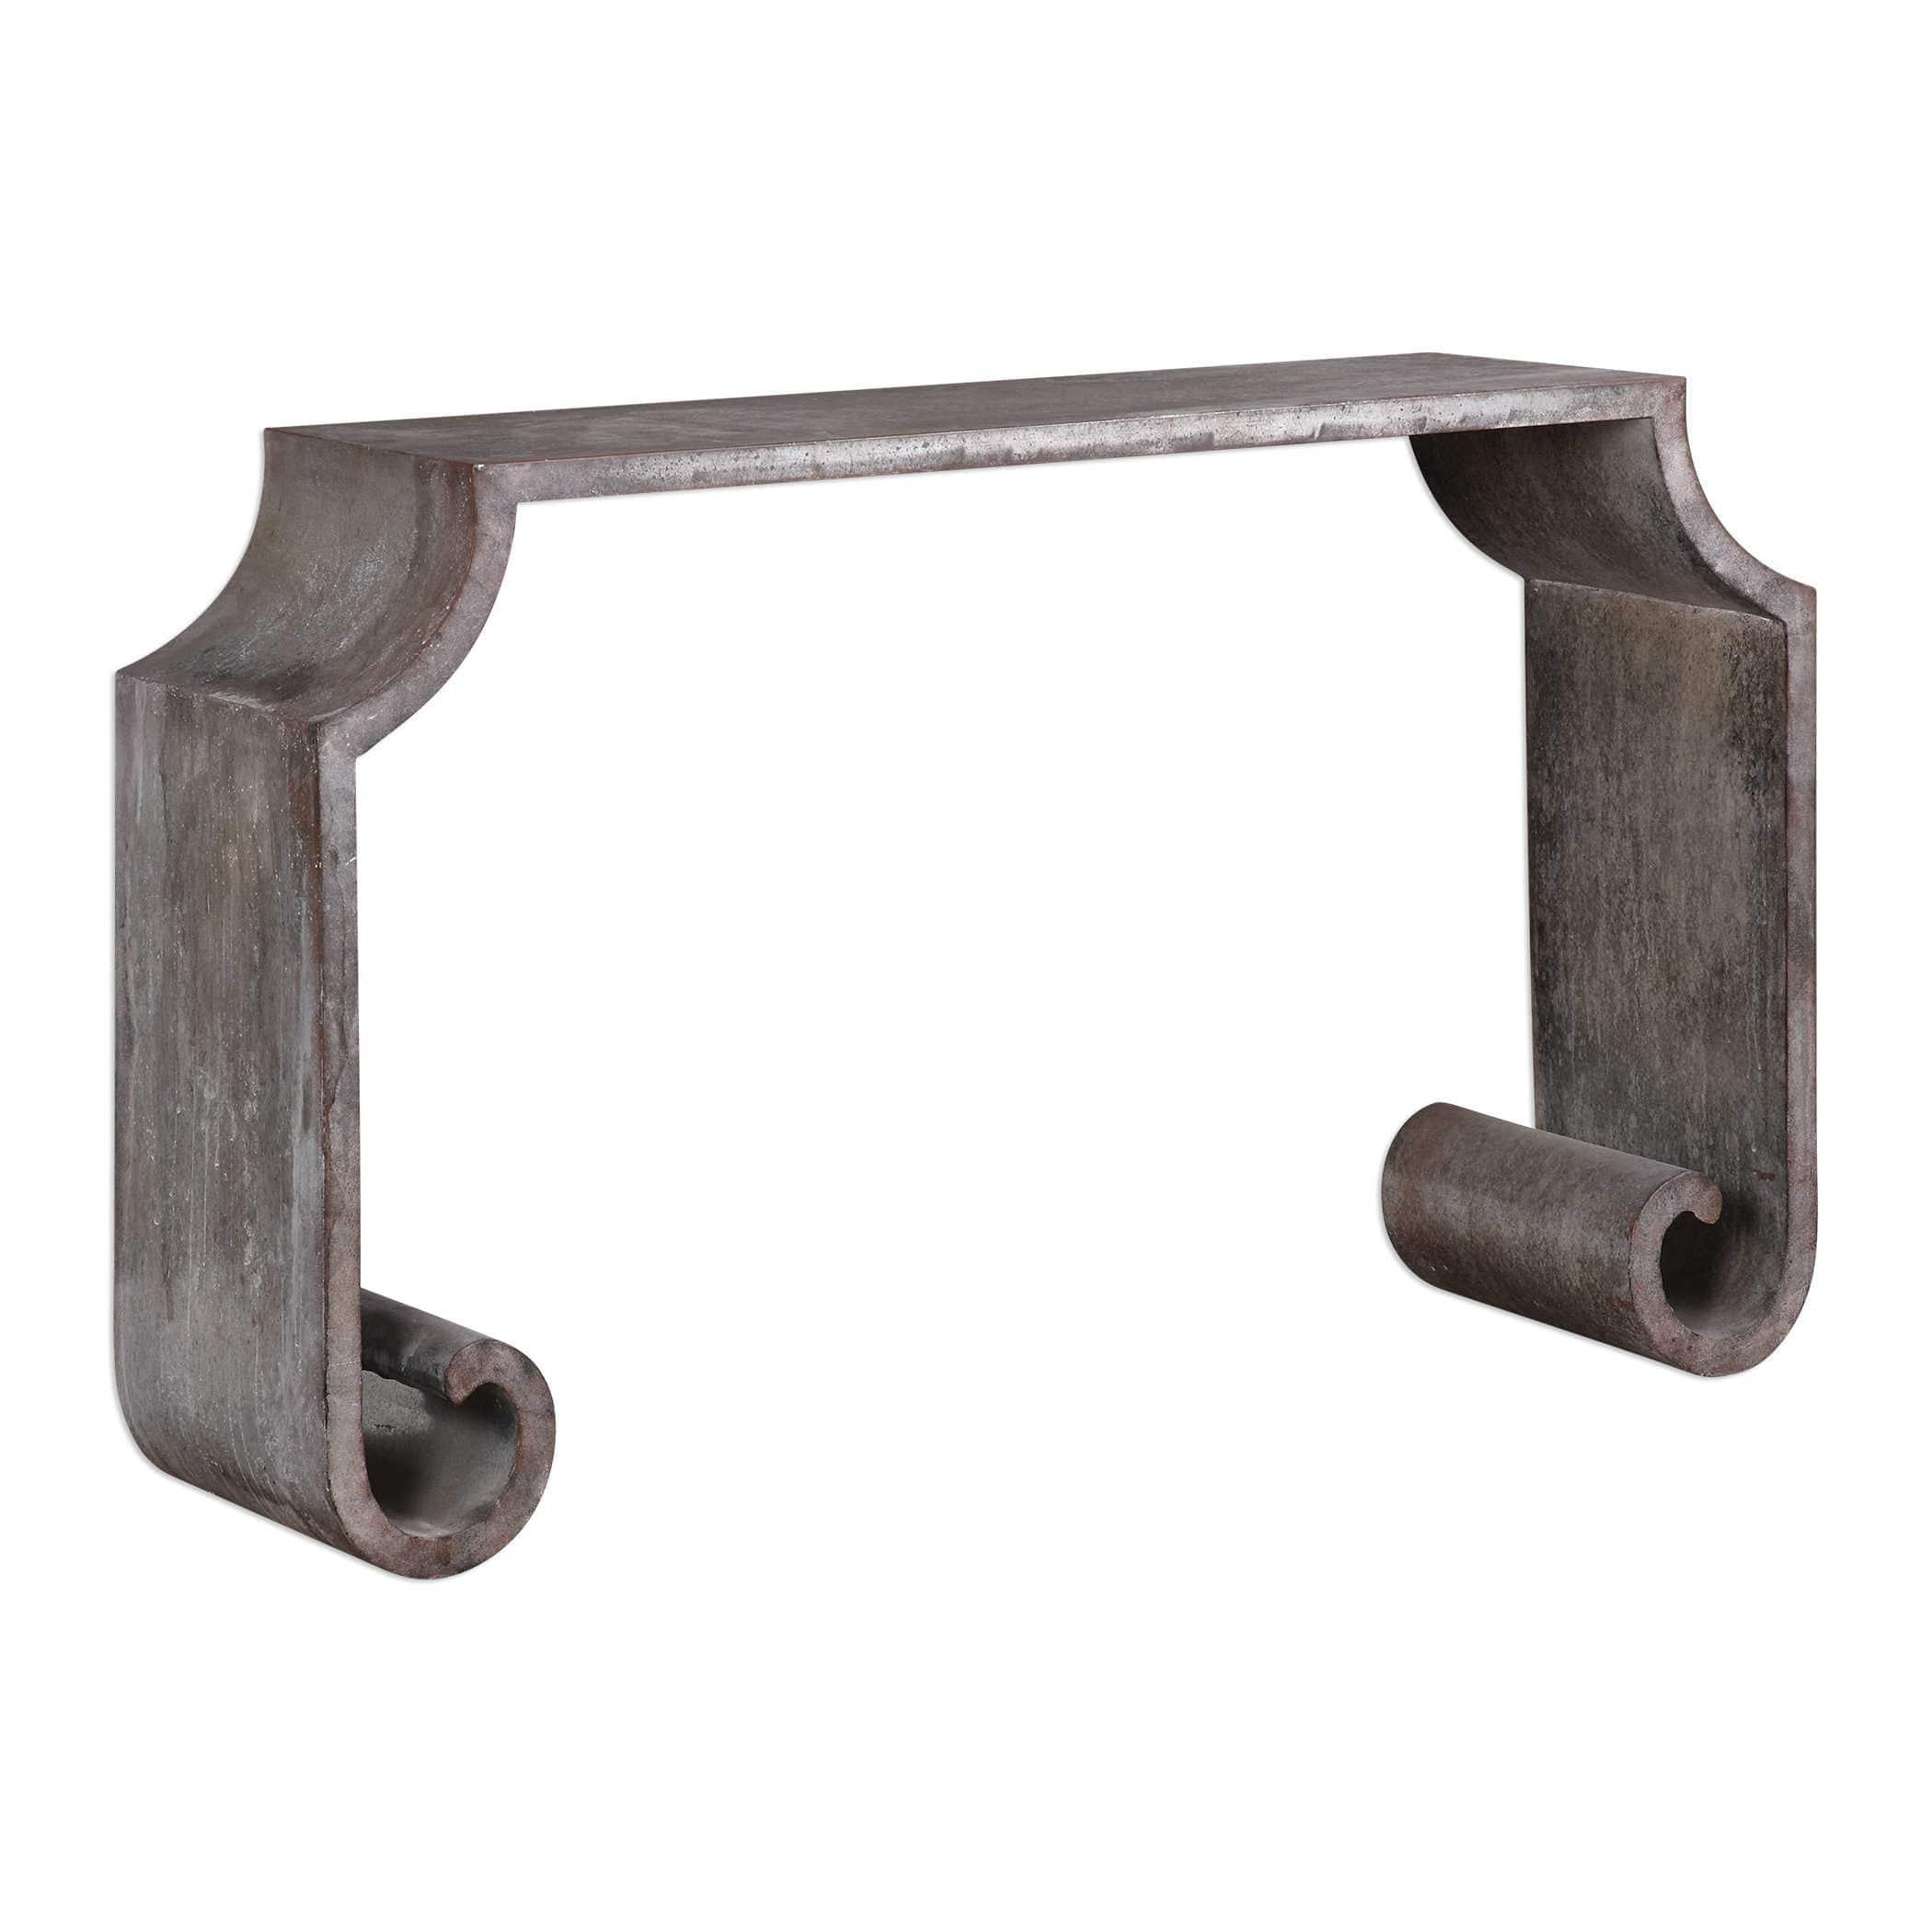 The Uttermost - Agathon Console Table - 24672 | Montreal Lighting & Hardware